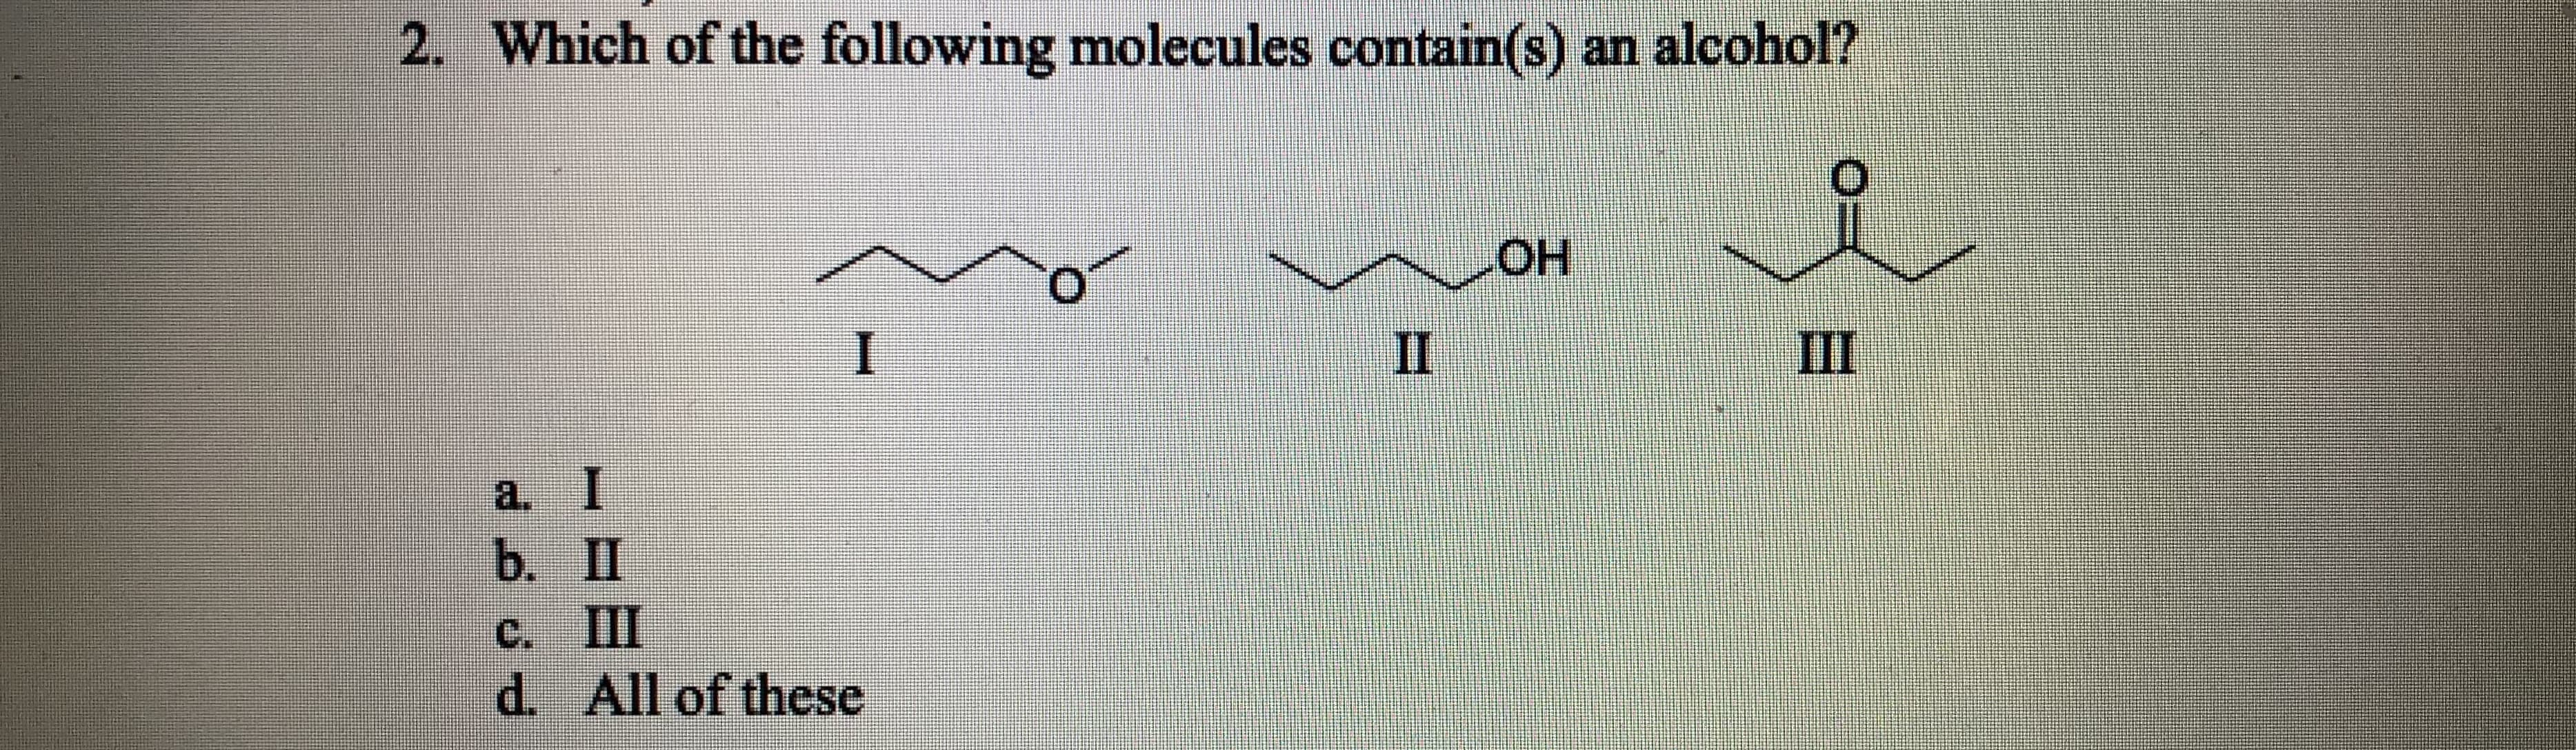 2. Which of the following molecules contain(s) an alcohol?
O.
II
III
a, I
b. П
C. III
d. All of these
